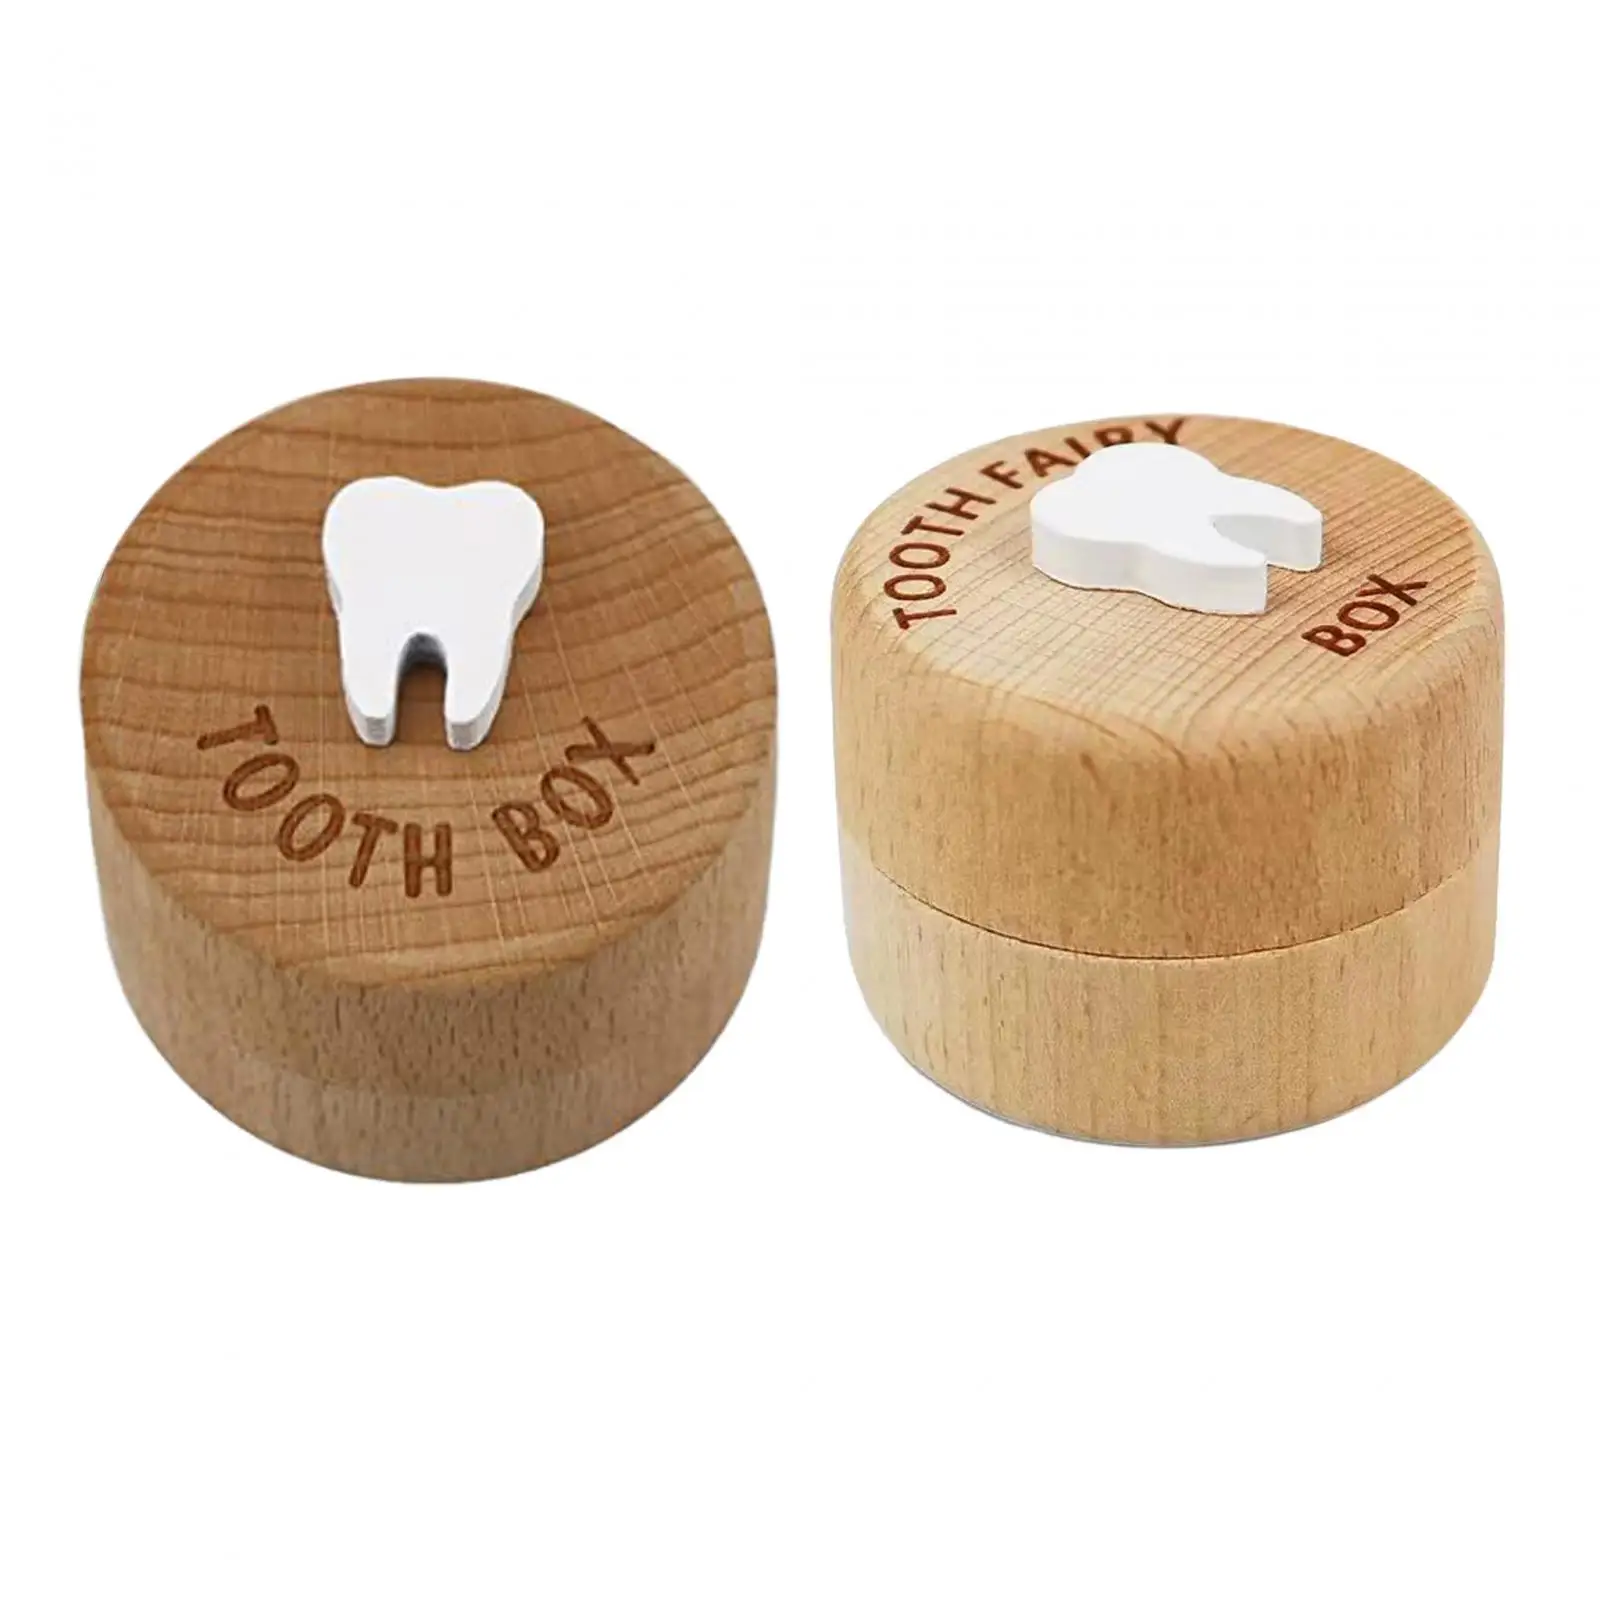 First Tooth Keepsake Box Fetal Hair Box for Lost Tooth Portable Multipurpose Tooth Holder for Baby Shower Kids Baby Children